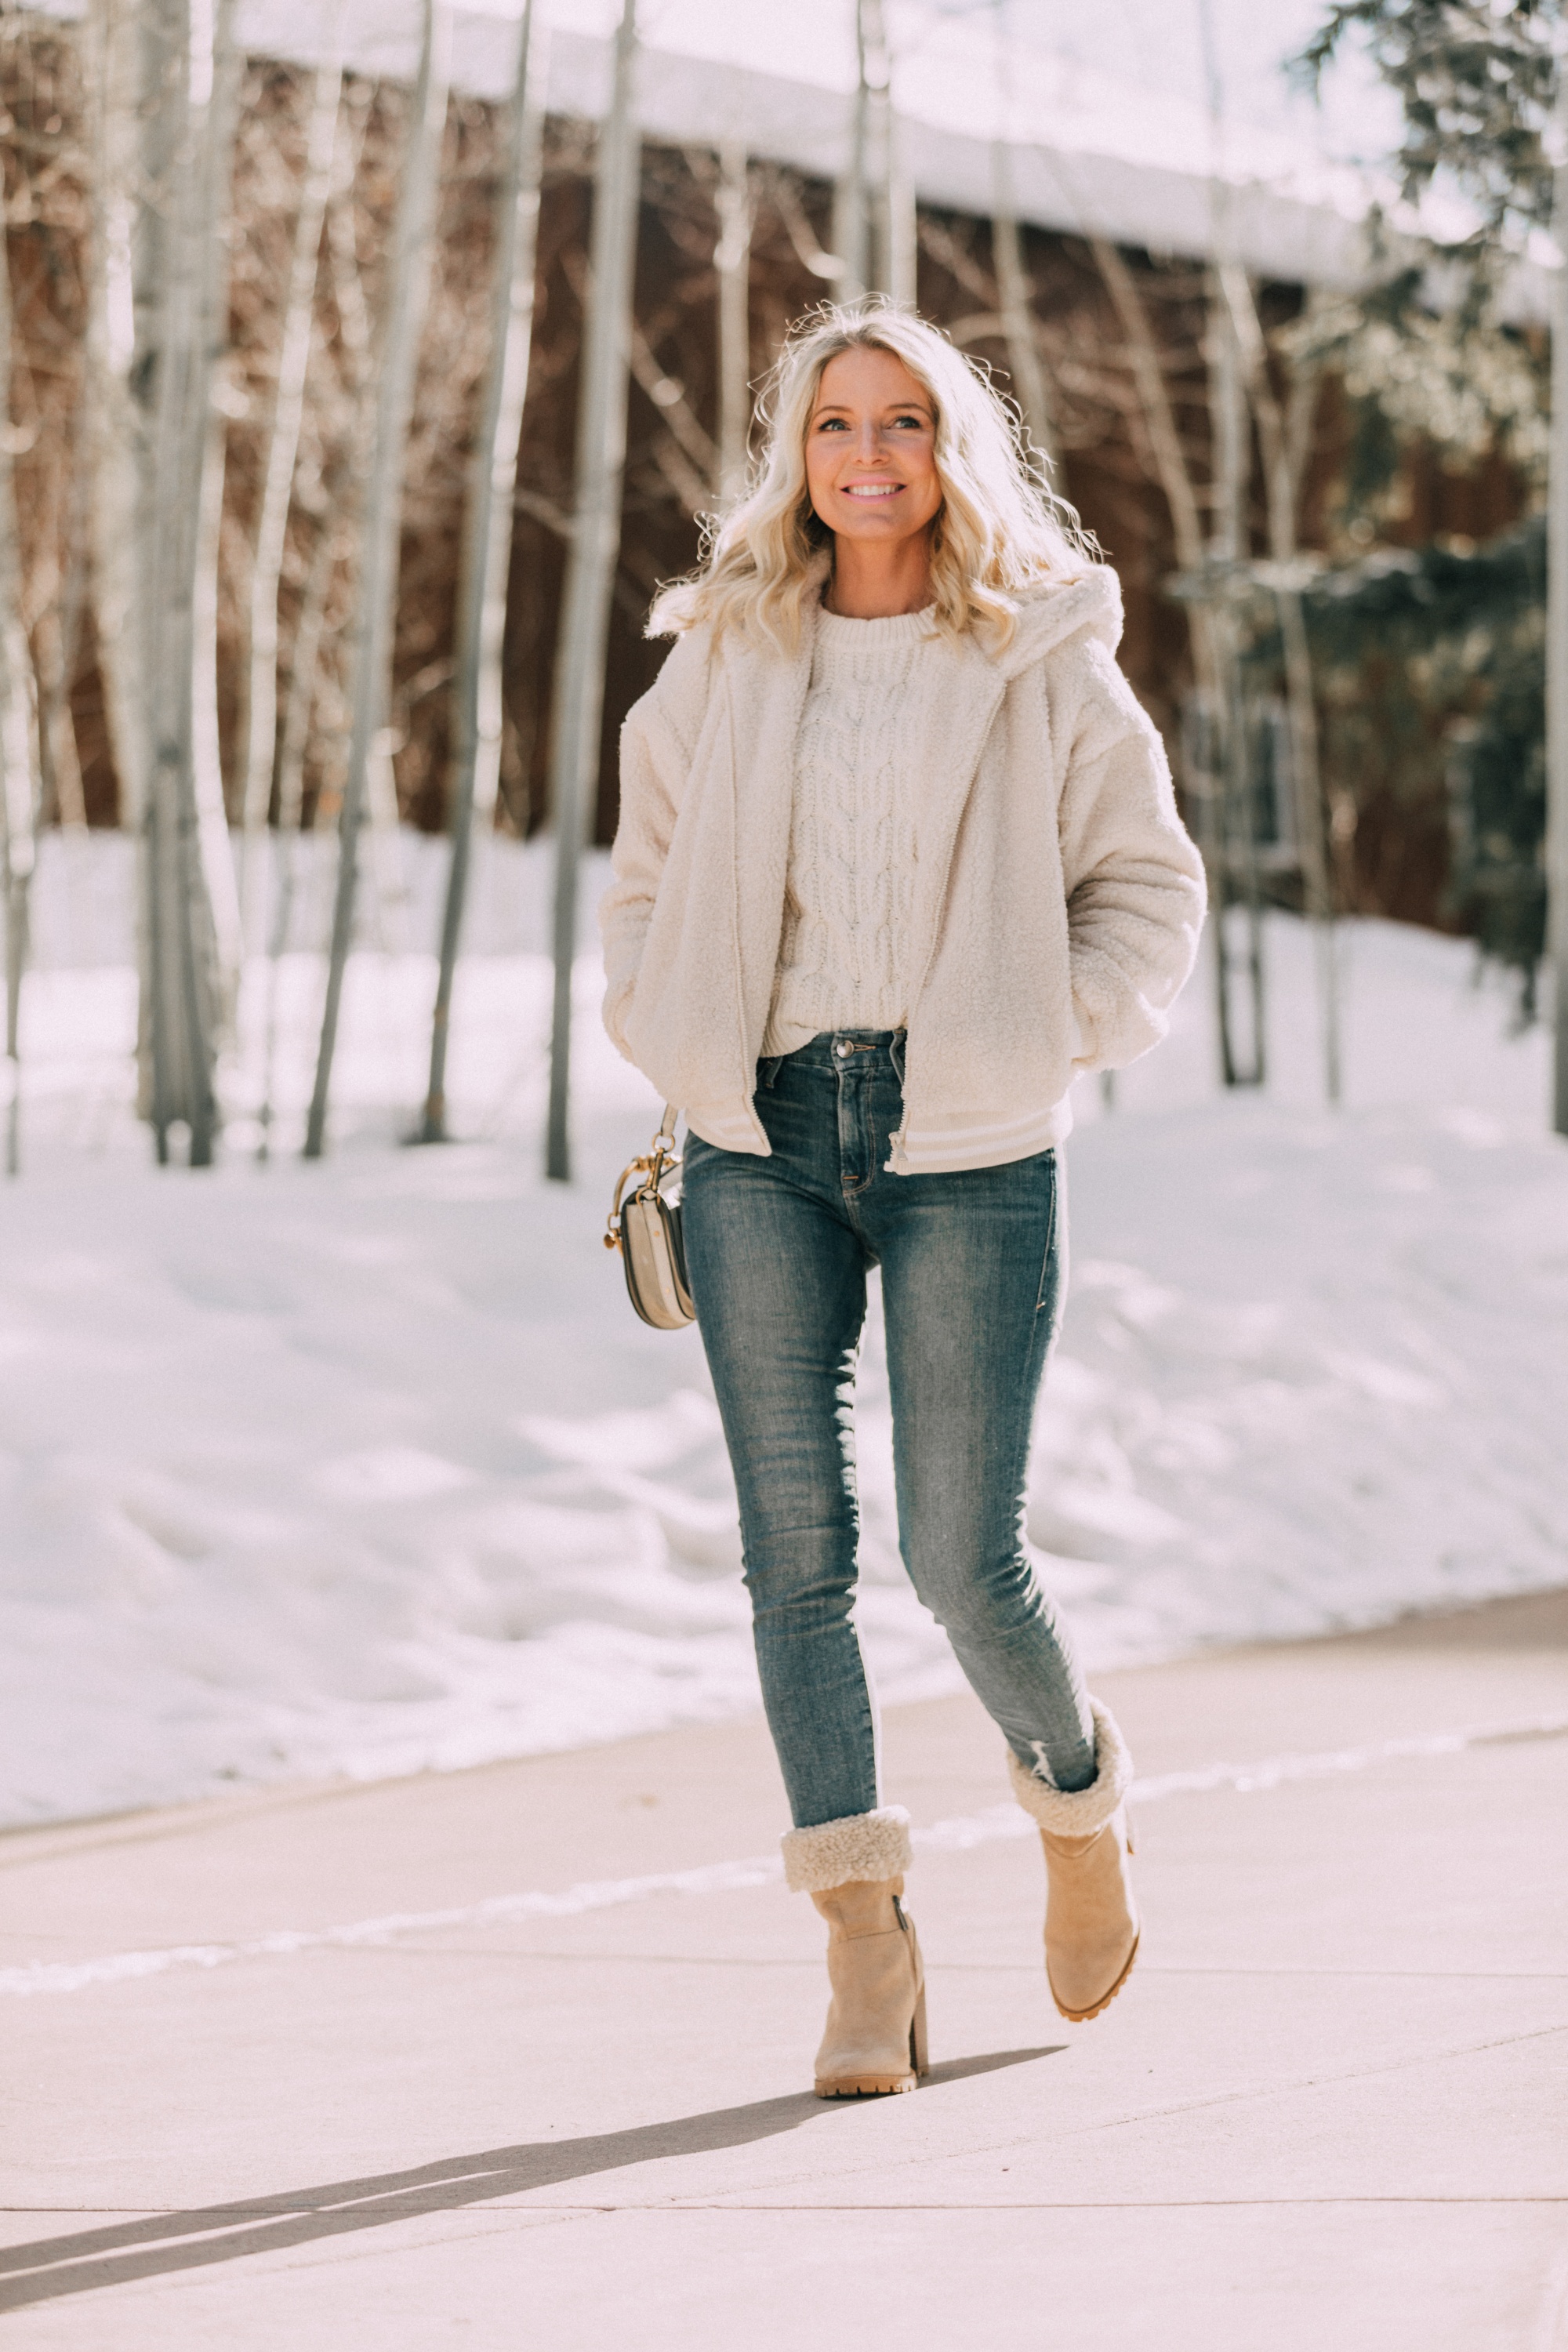 Winter White, Fashion blogger Erin Busbee of BusbeeStyle.com wearing a faux fur teddy jacket by Scoop, white cable knit sweater by Scoop, medium wash skinny jeans, and faux shearling foldover boots by Scoop from Walmart in Telluride, Colorado